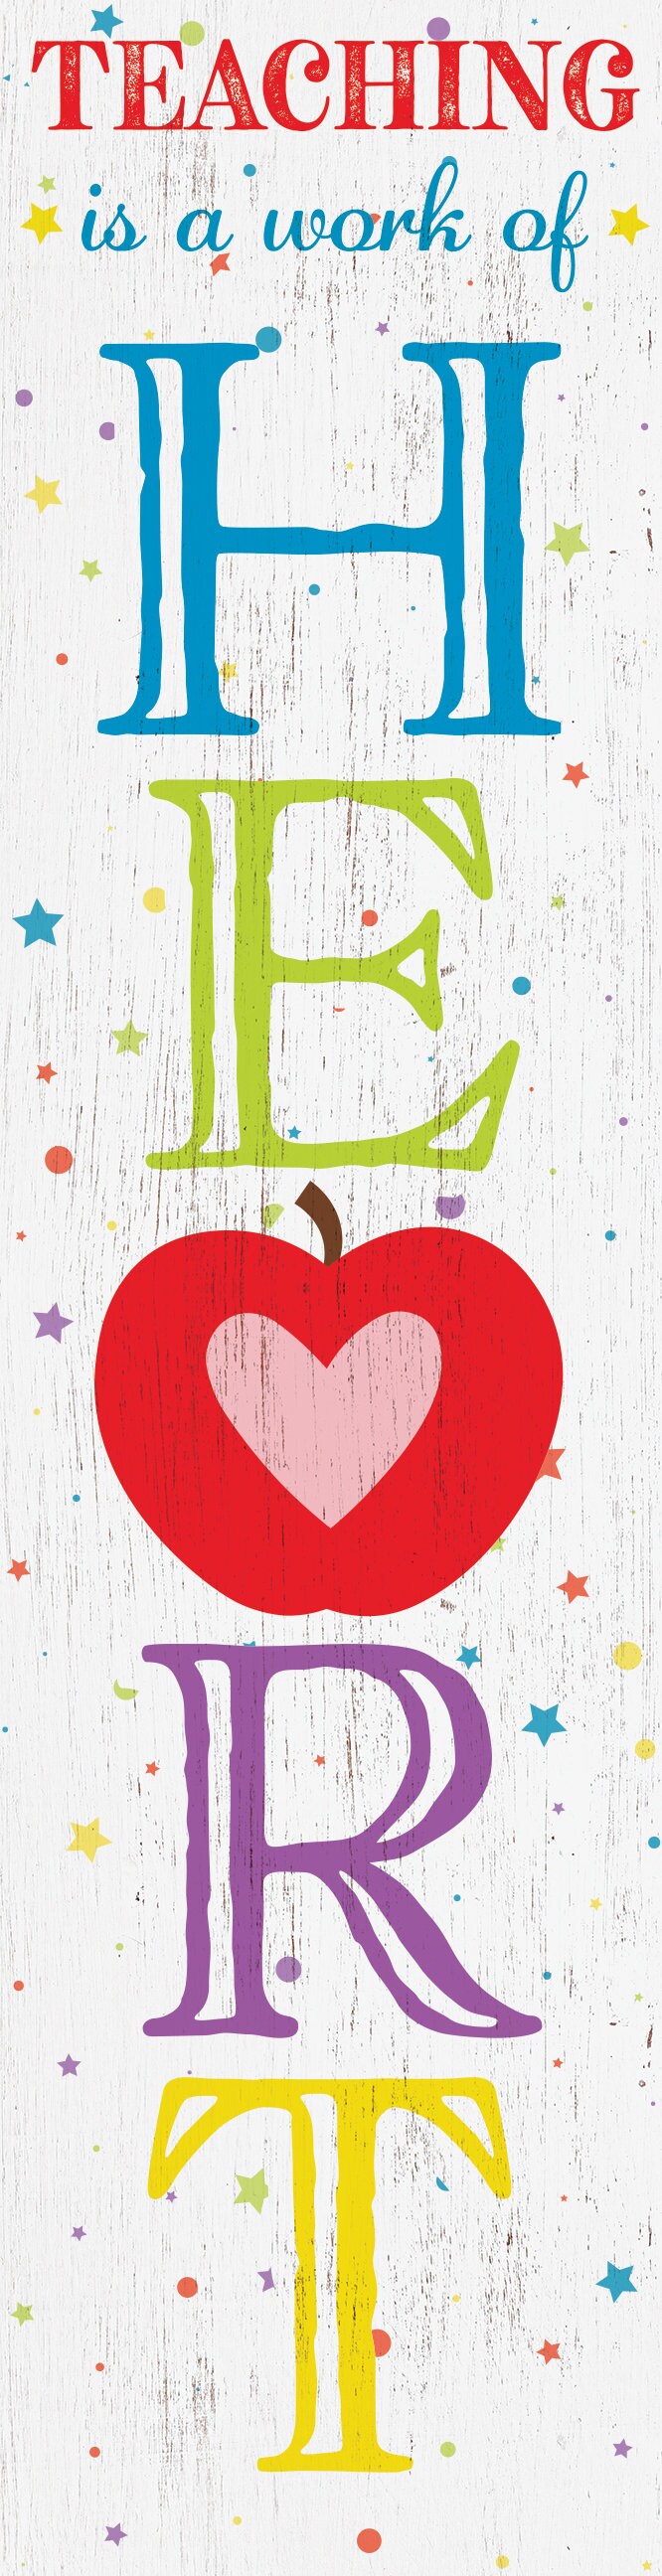 Teaching is a Work of Heart Porch Sign - 36" x 9.25" Apple Pattern Wooden Front Door Wall Decor - Handcrafted Home Decoration for Teachers